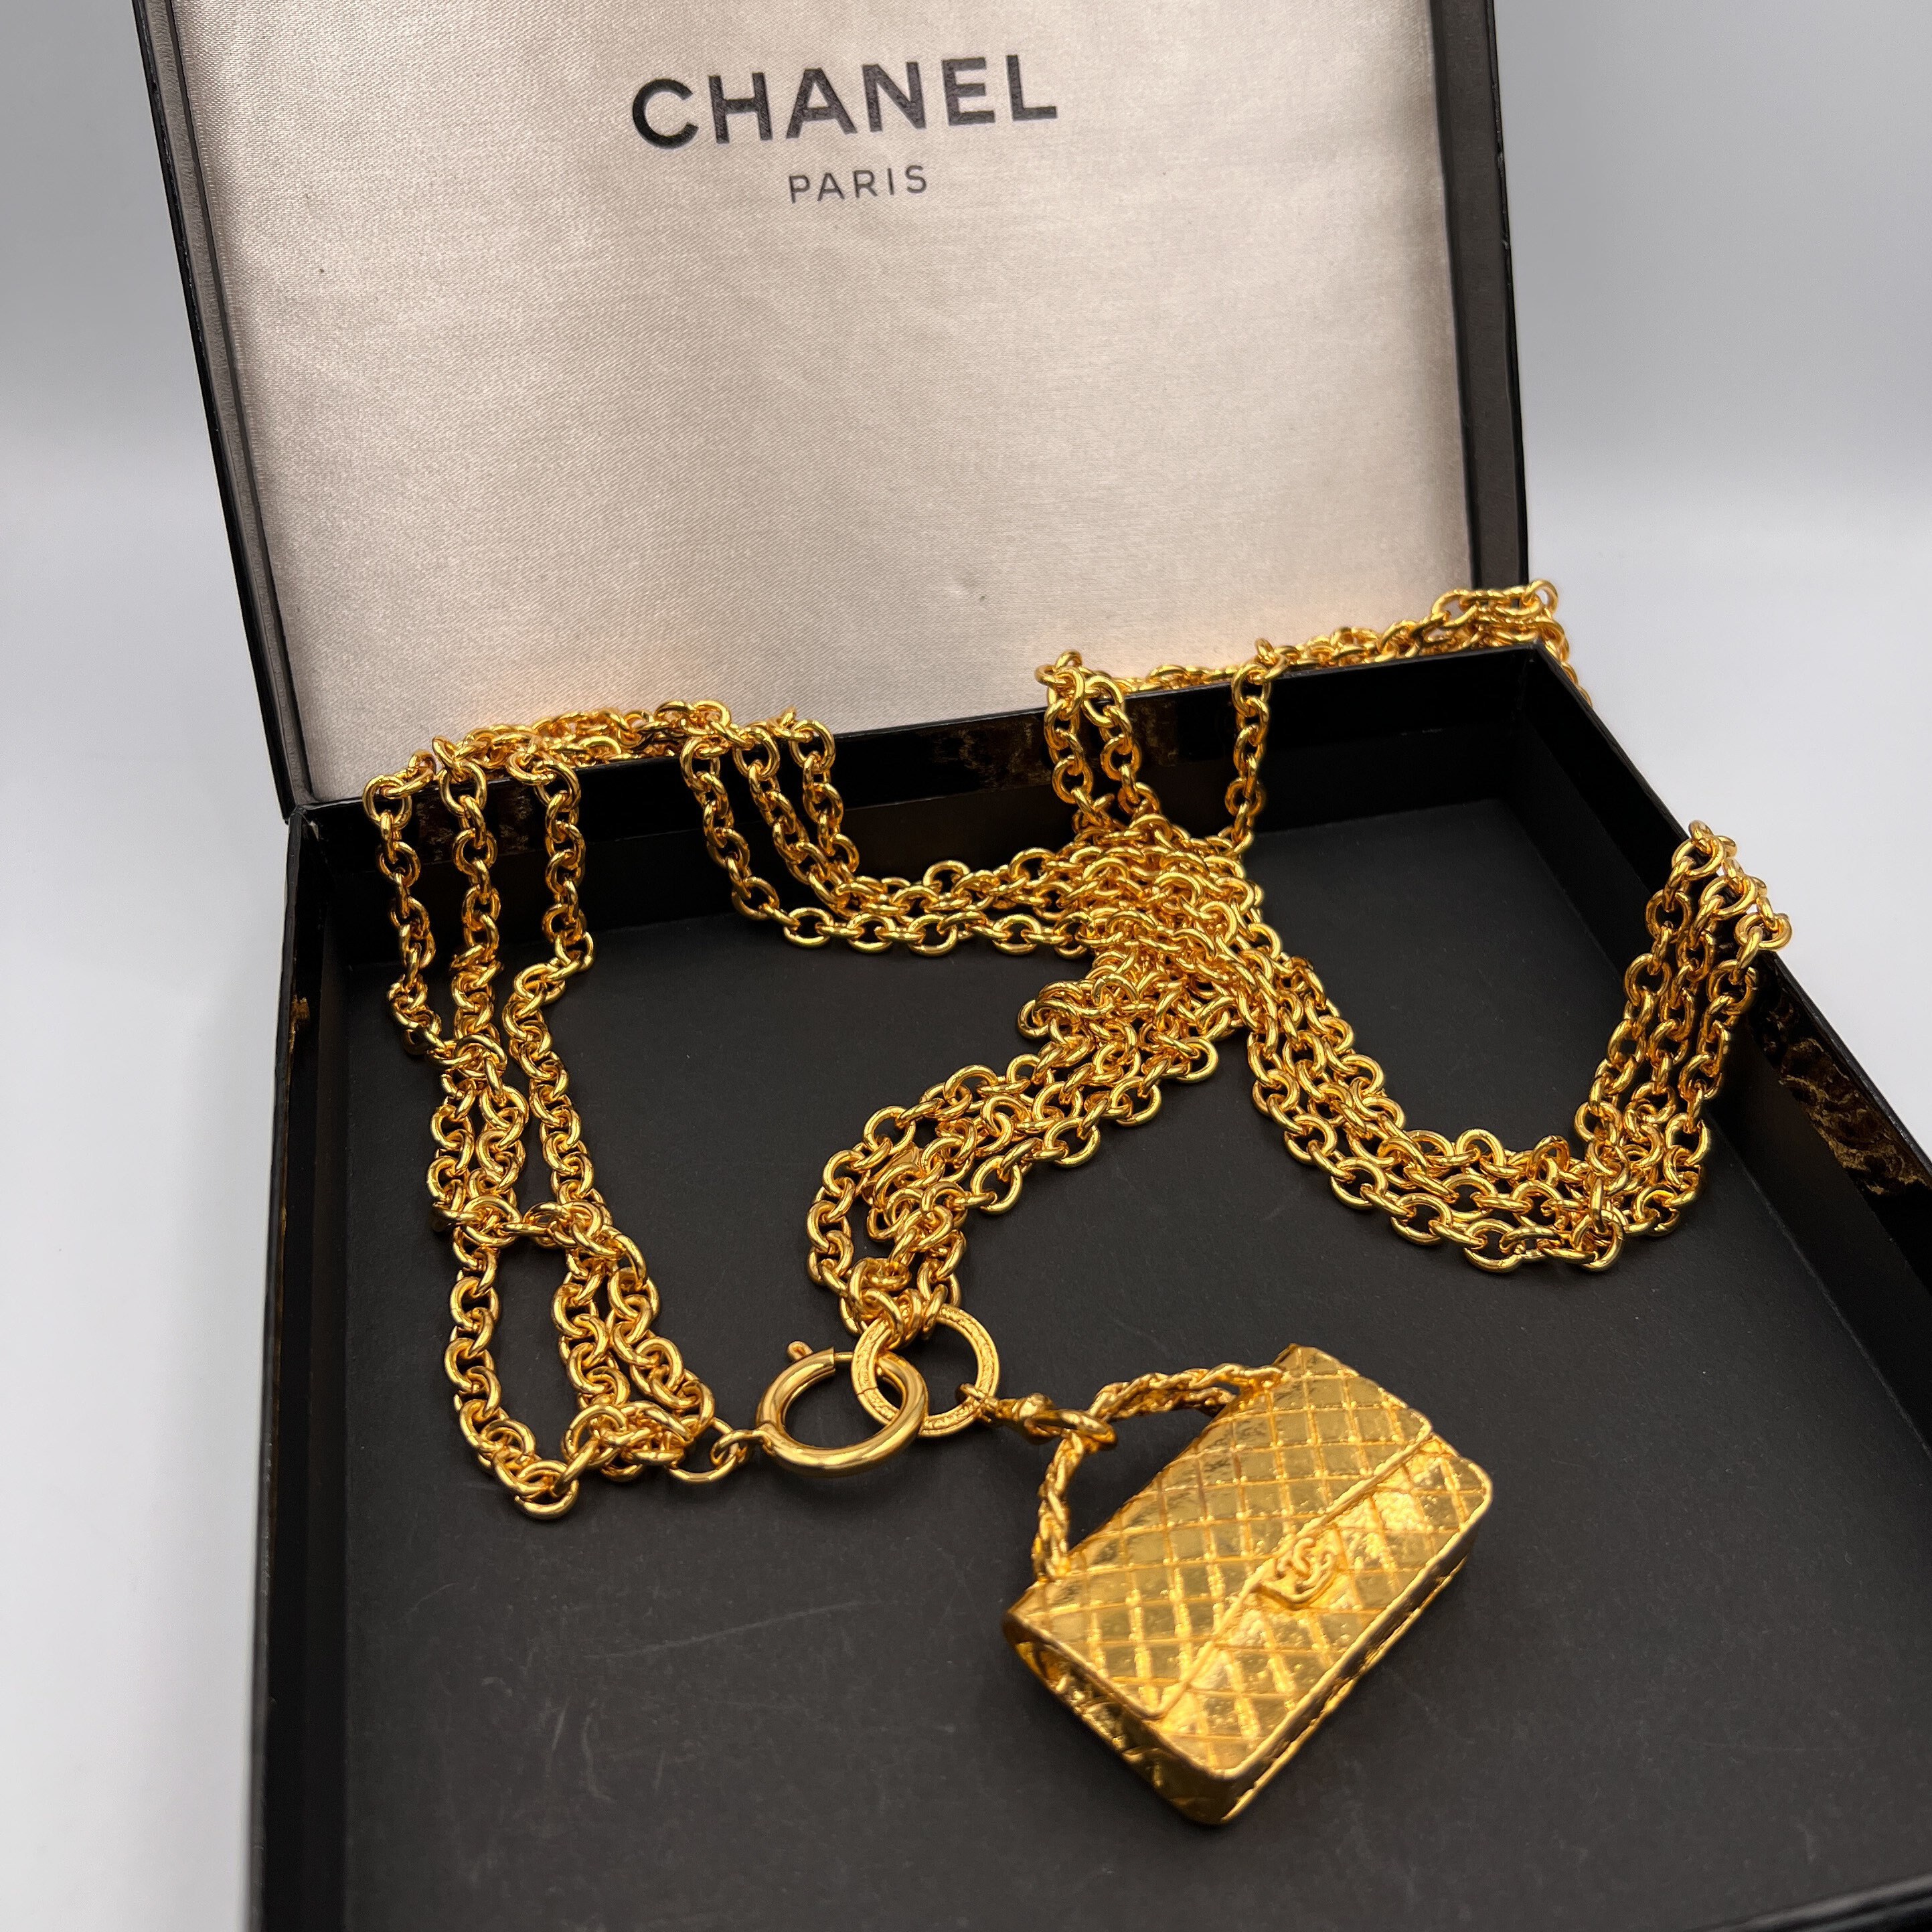 Chanel Vintage Quilted Bag Charm Pendant Necklace